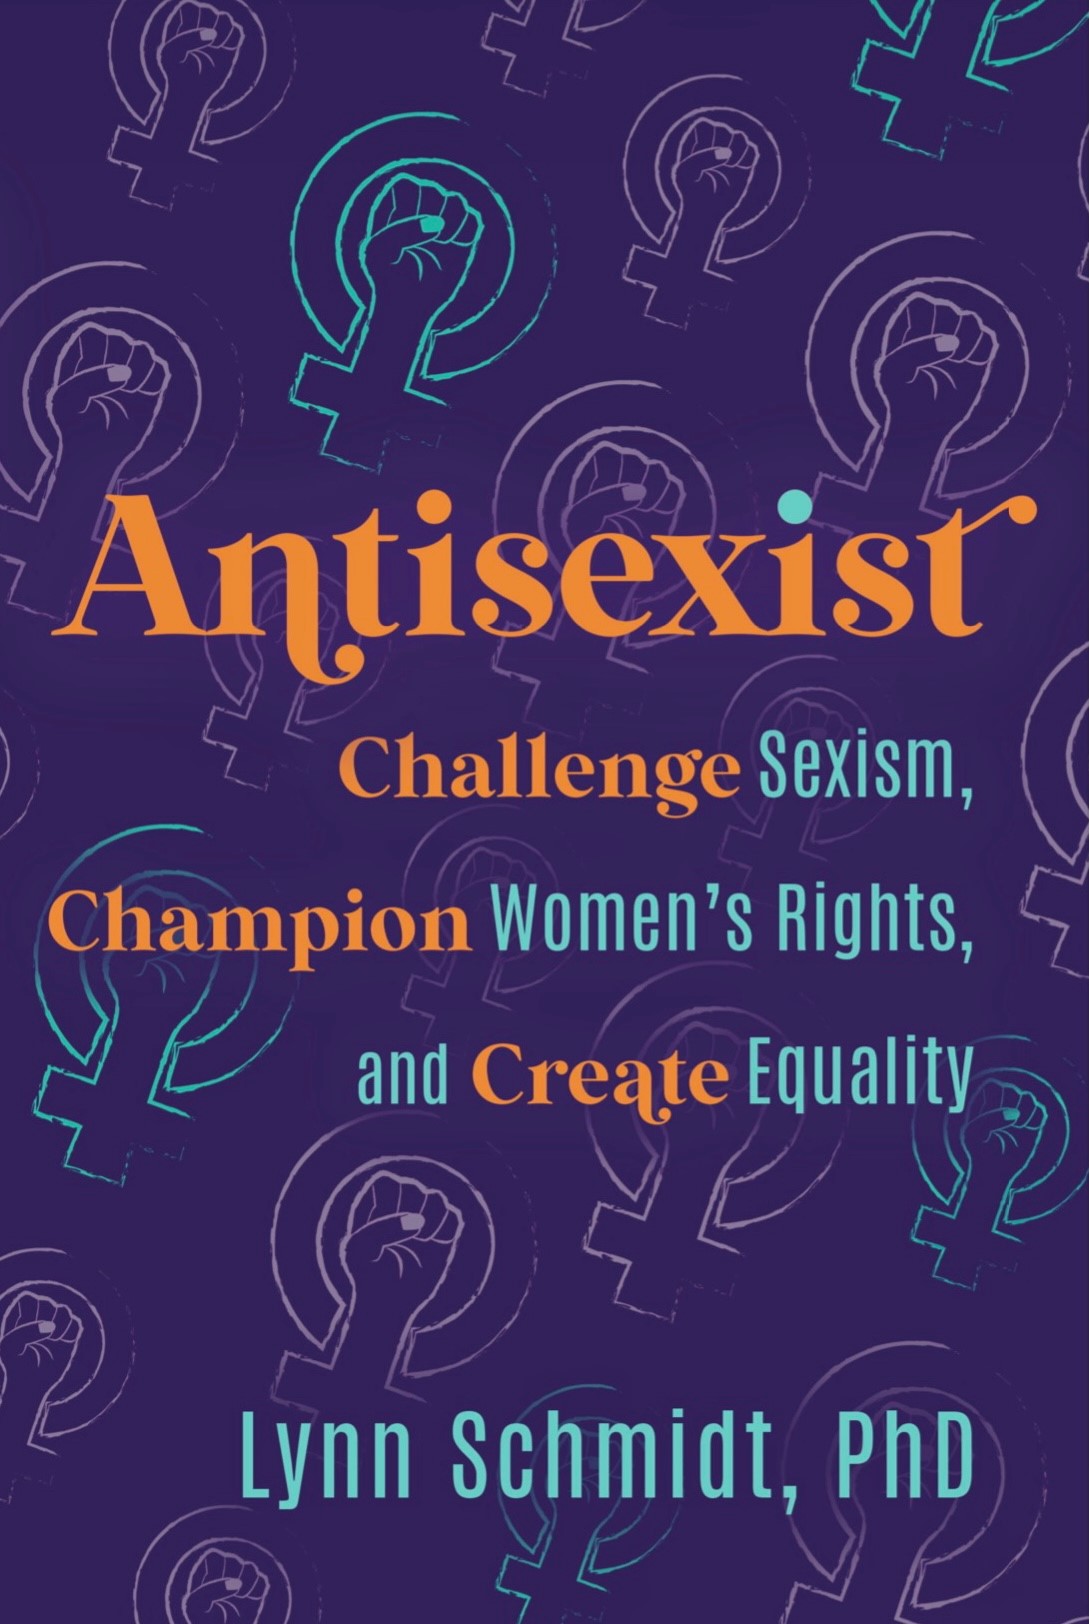 Antisexist book cover